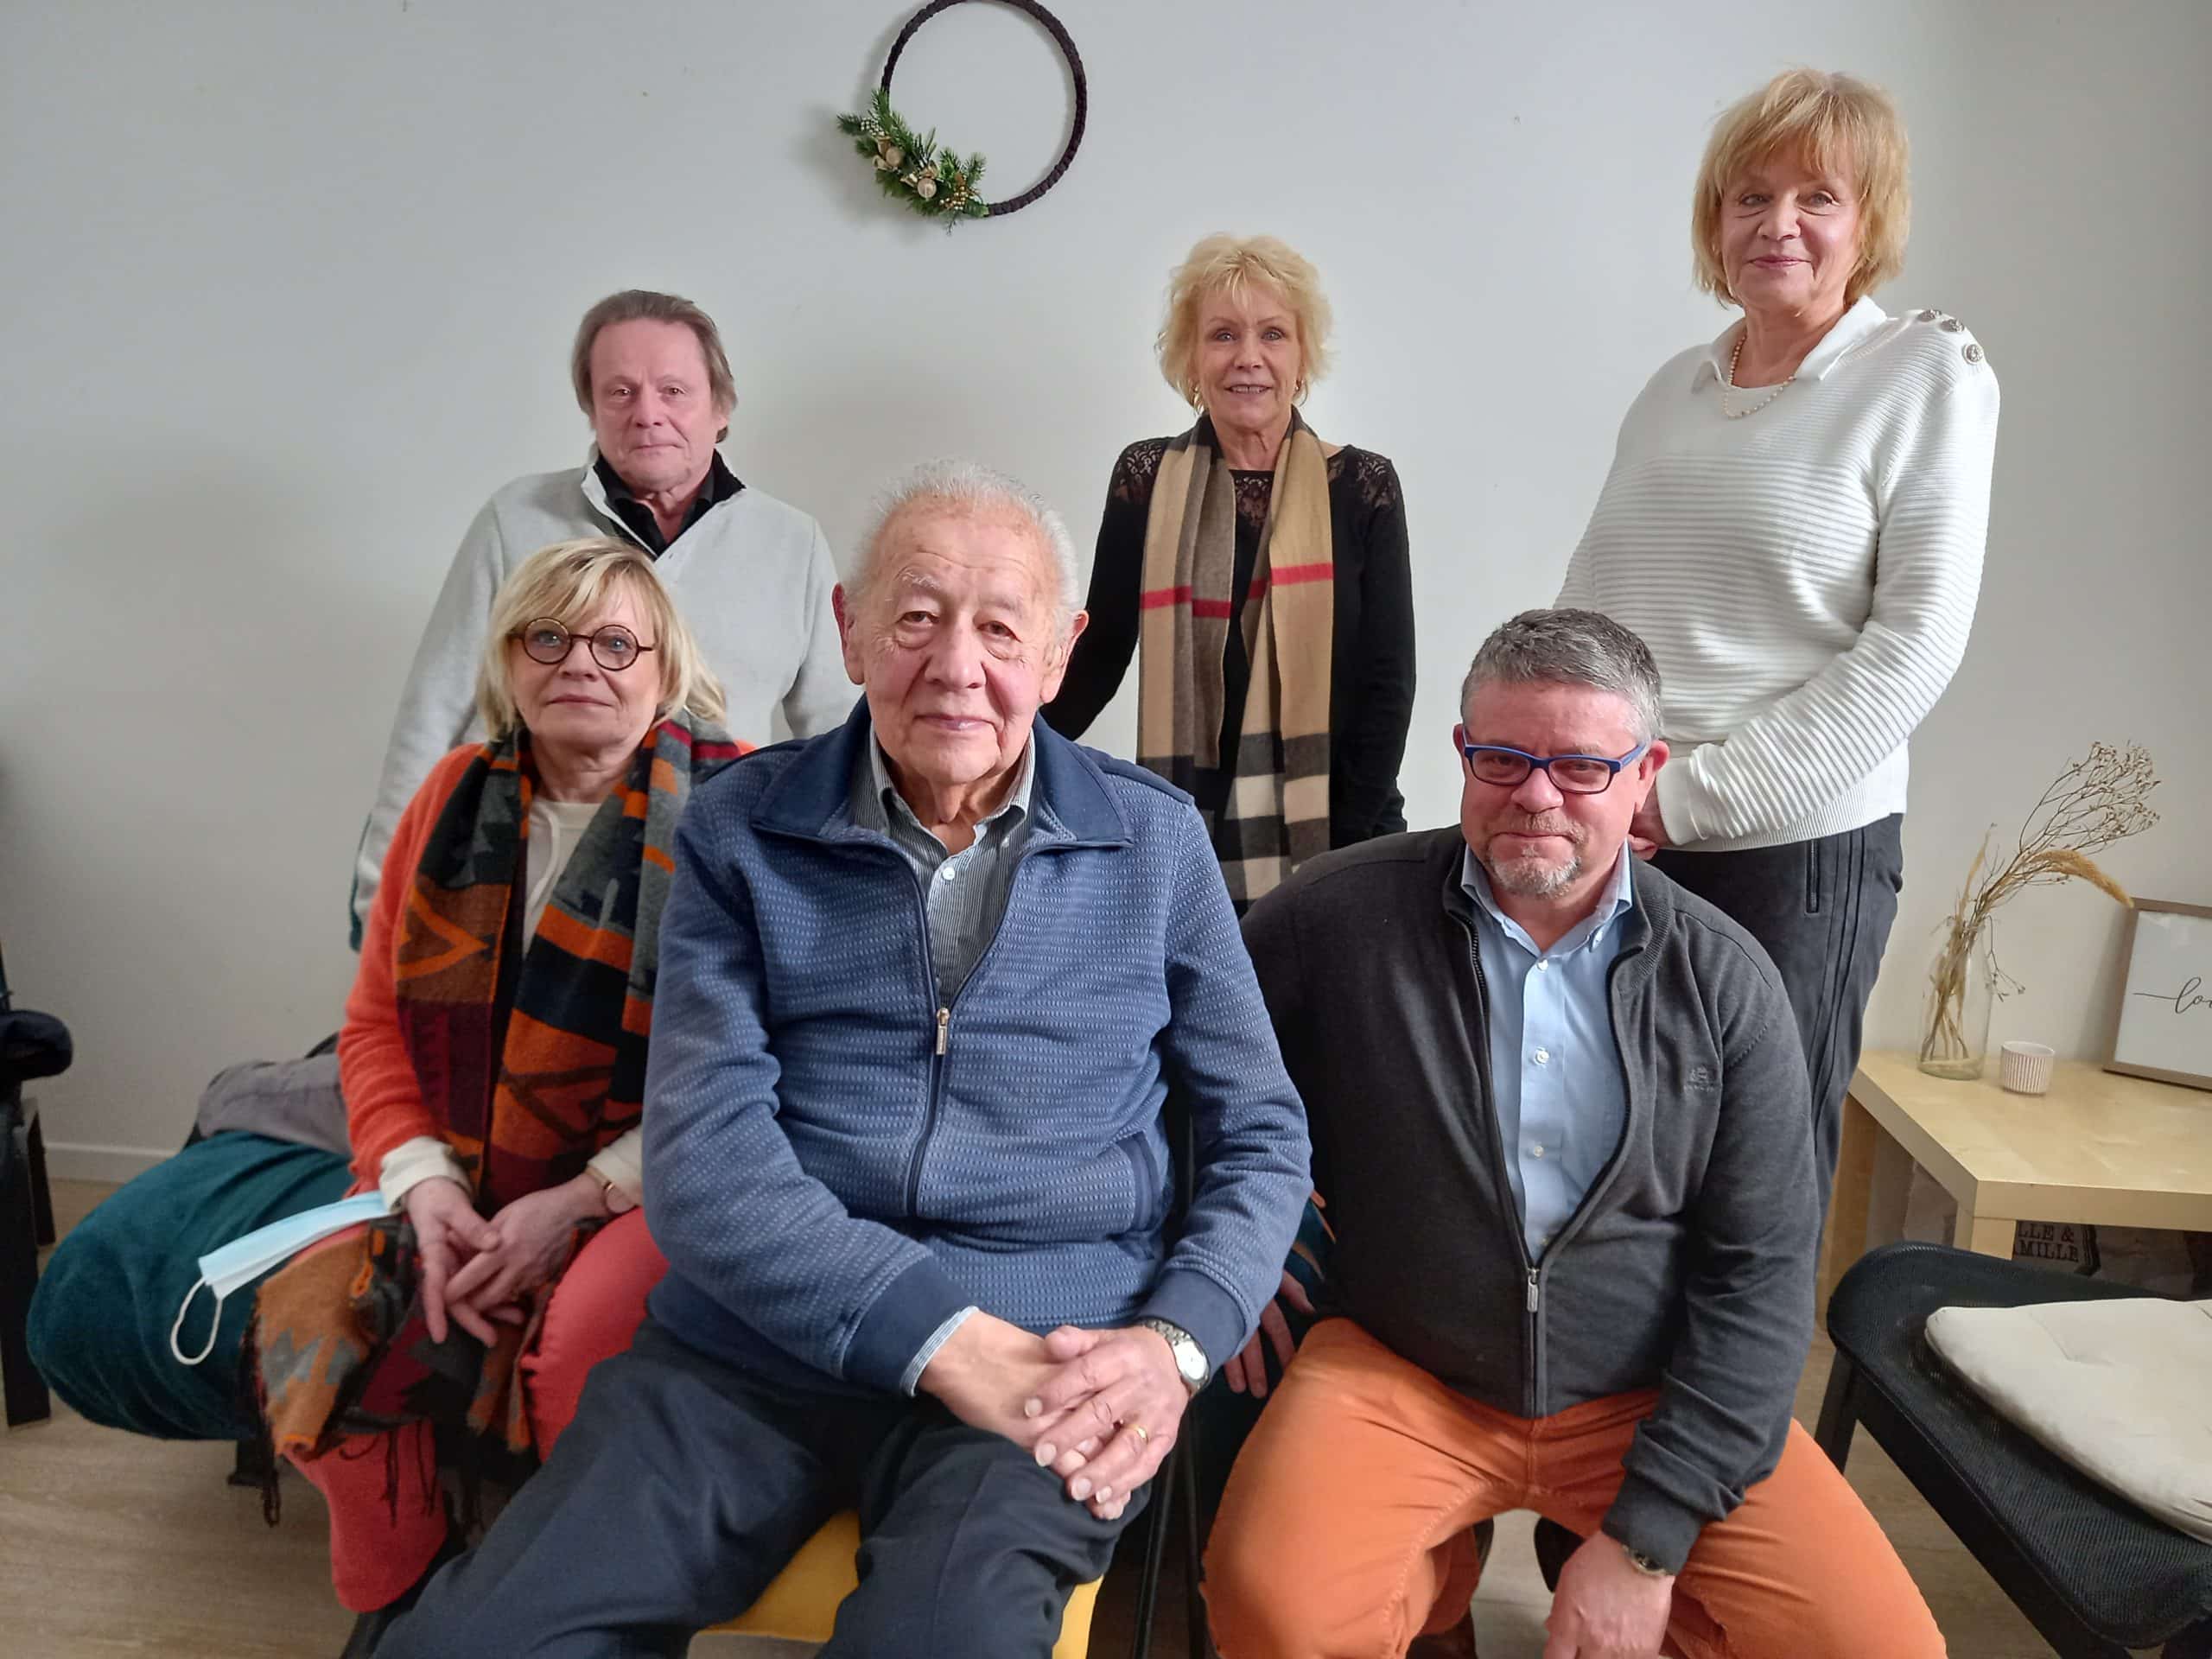 David (center) with the descendants of the family who saved him during the Holocaust